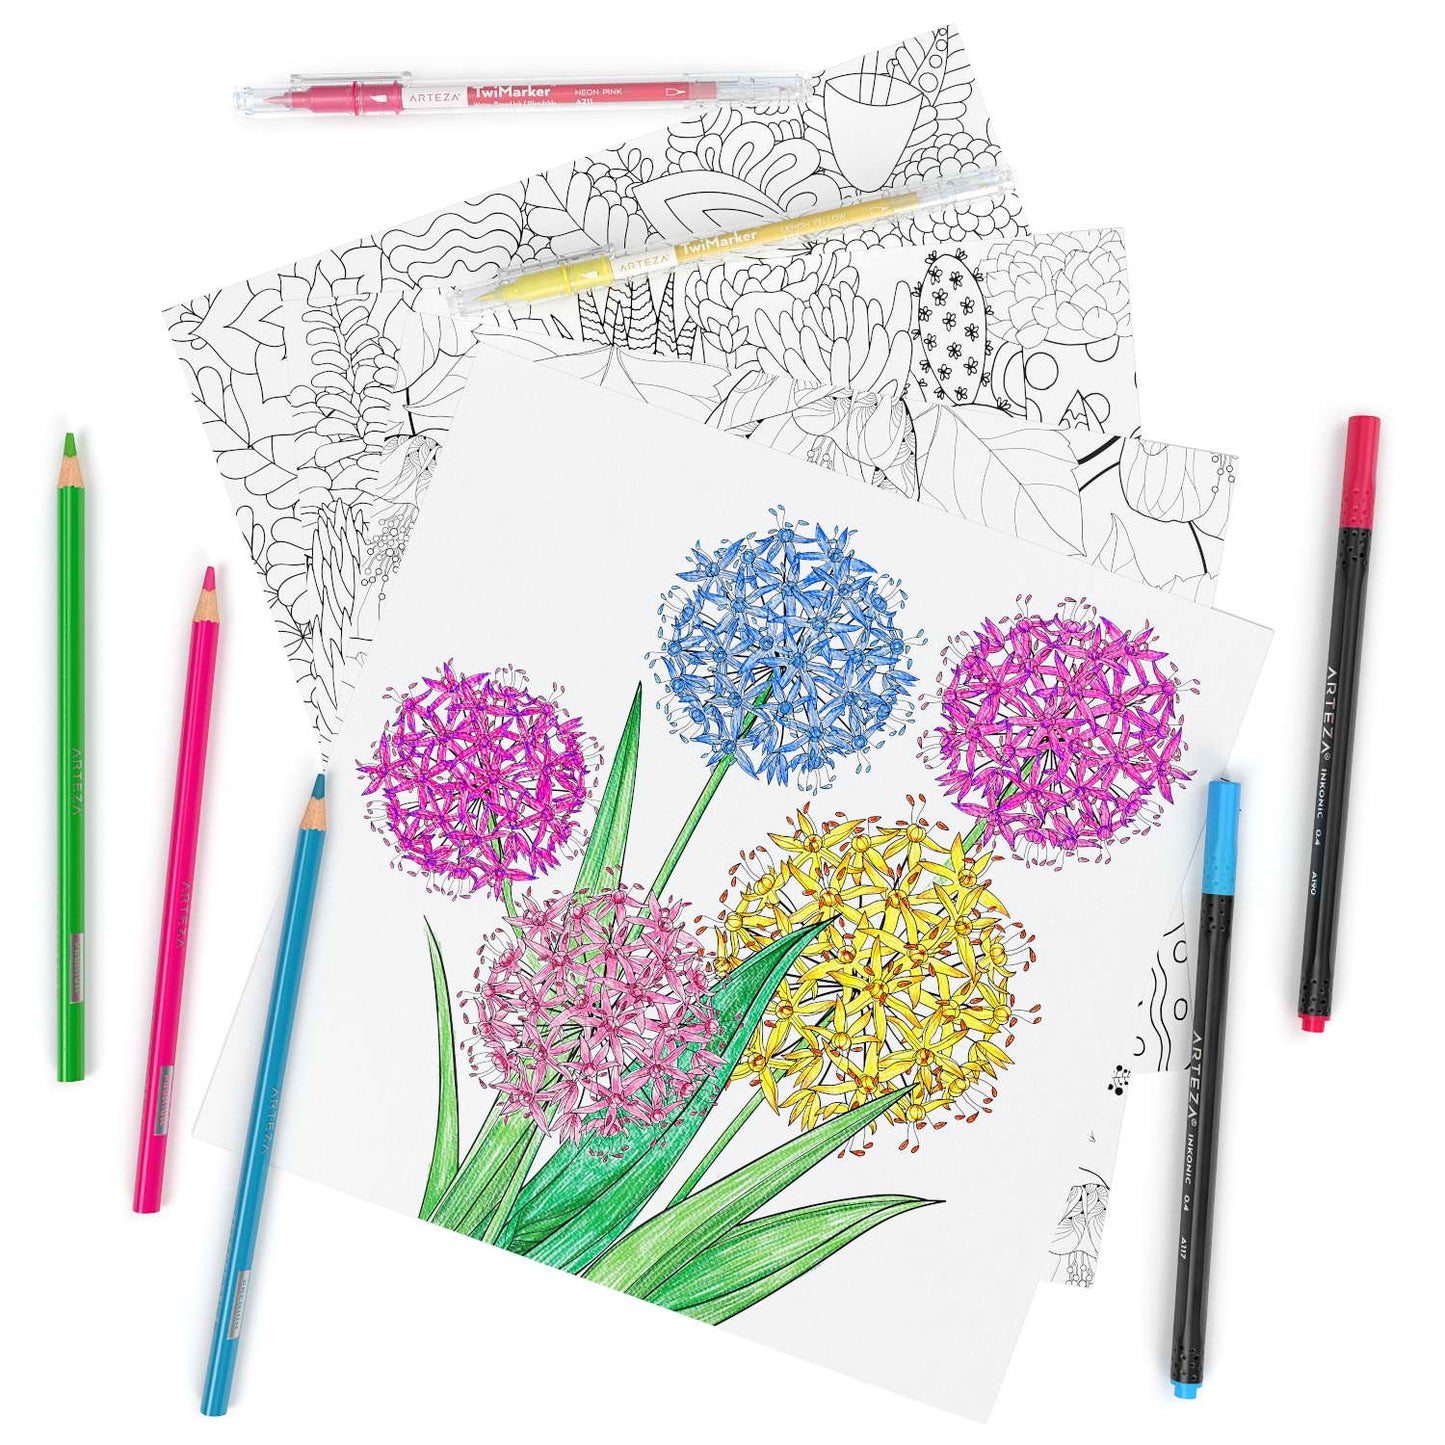 Floral Adult Coloring Books For Women by Eveline Kusabana